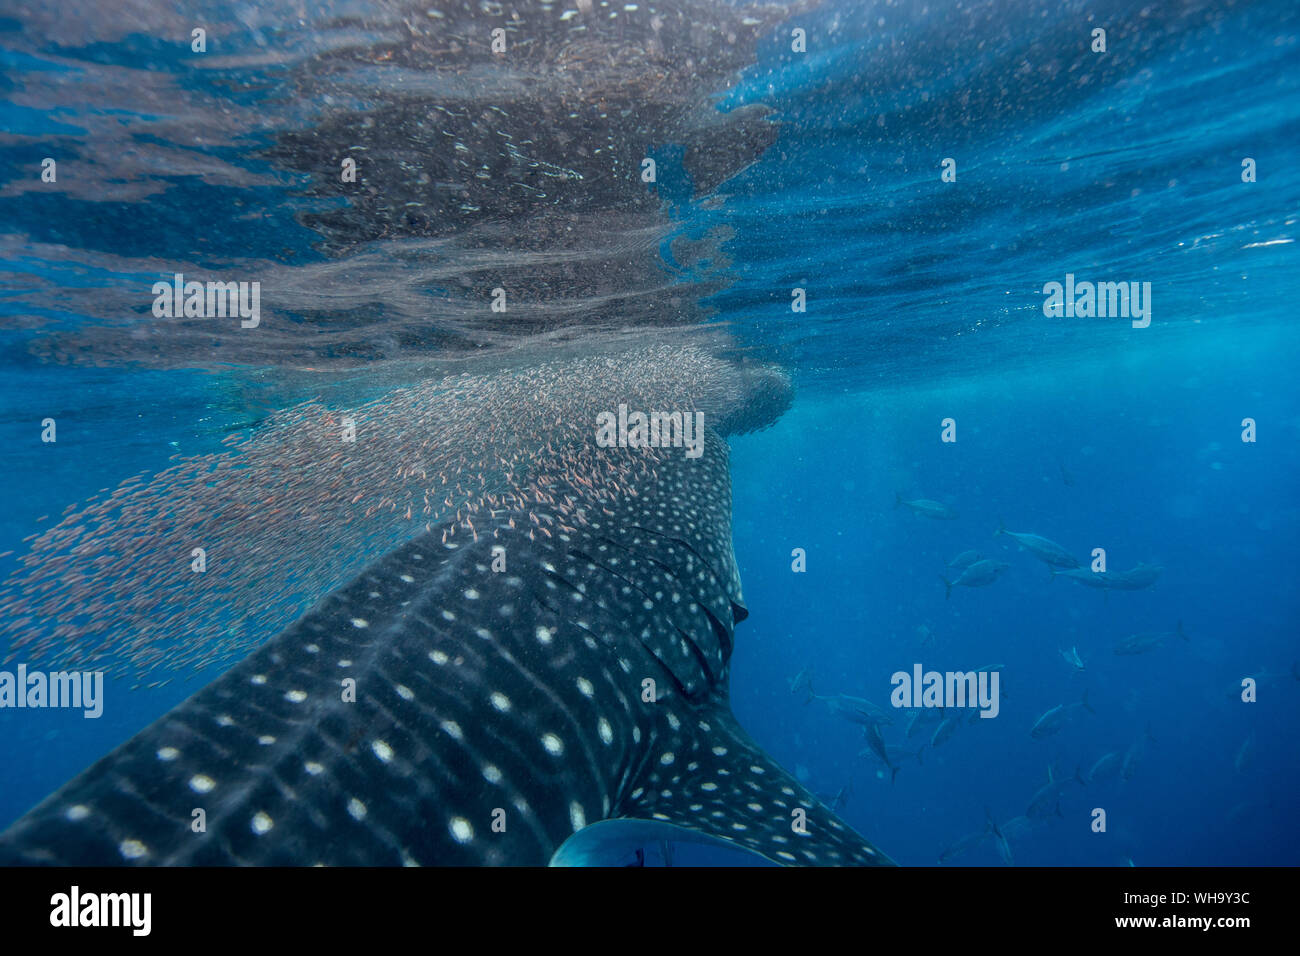 Whale shark (Rhincodon typus) vertical suction feeding on a shoal of red fish, Honda Bay, Palawan, The Philippines, Southeast Asia, Asia Stock Photo